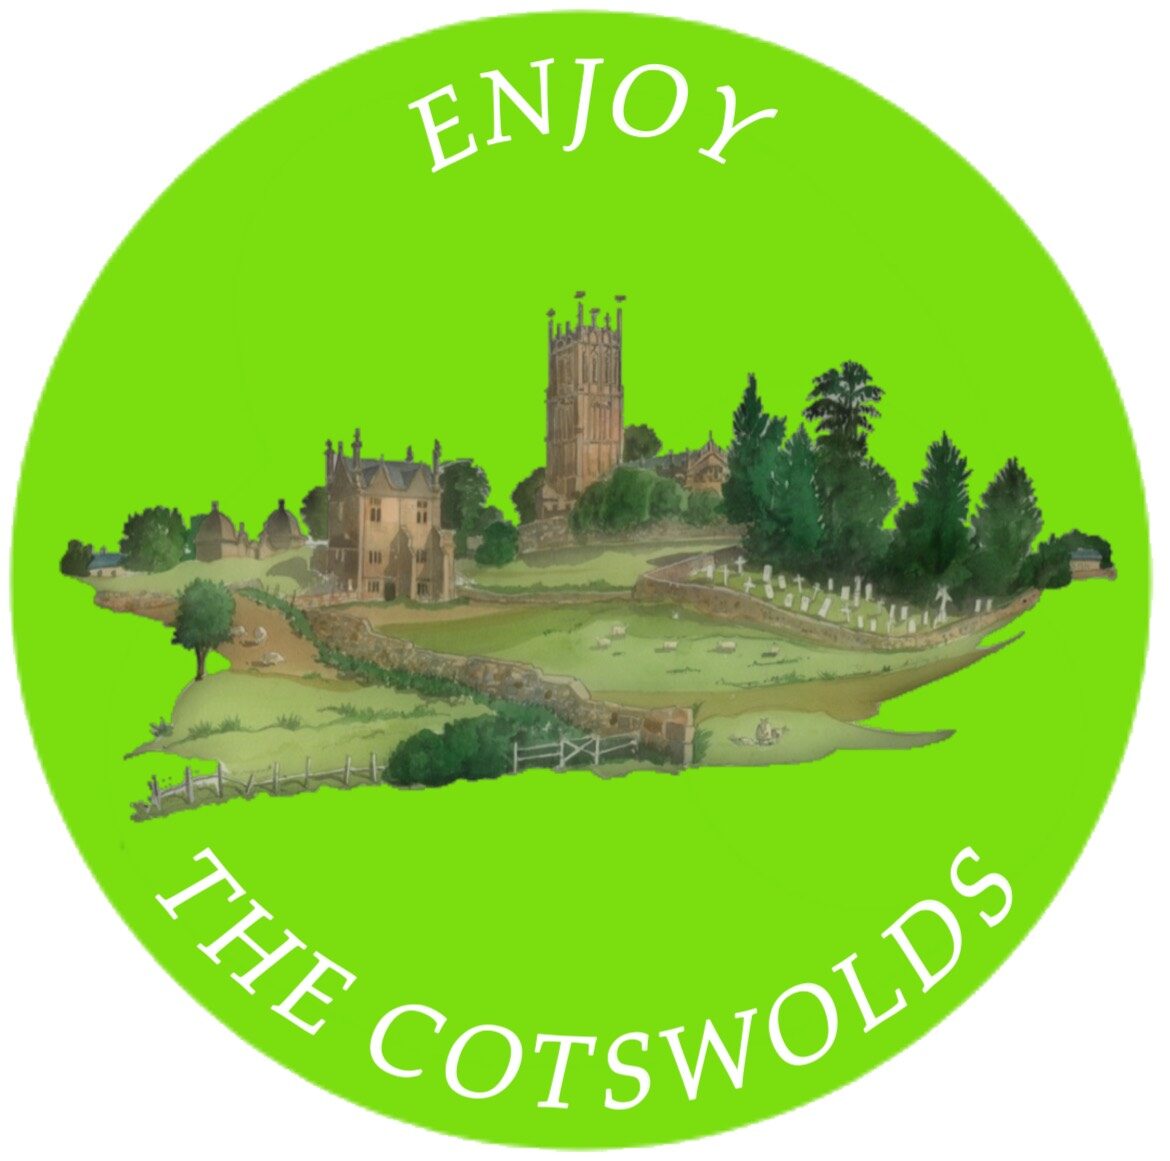 Enjoy The Cotswolds